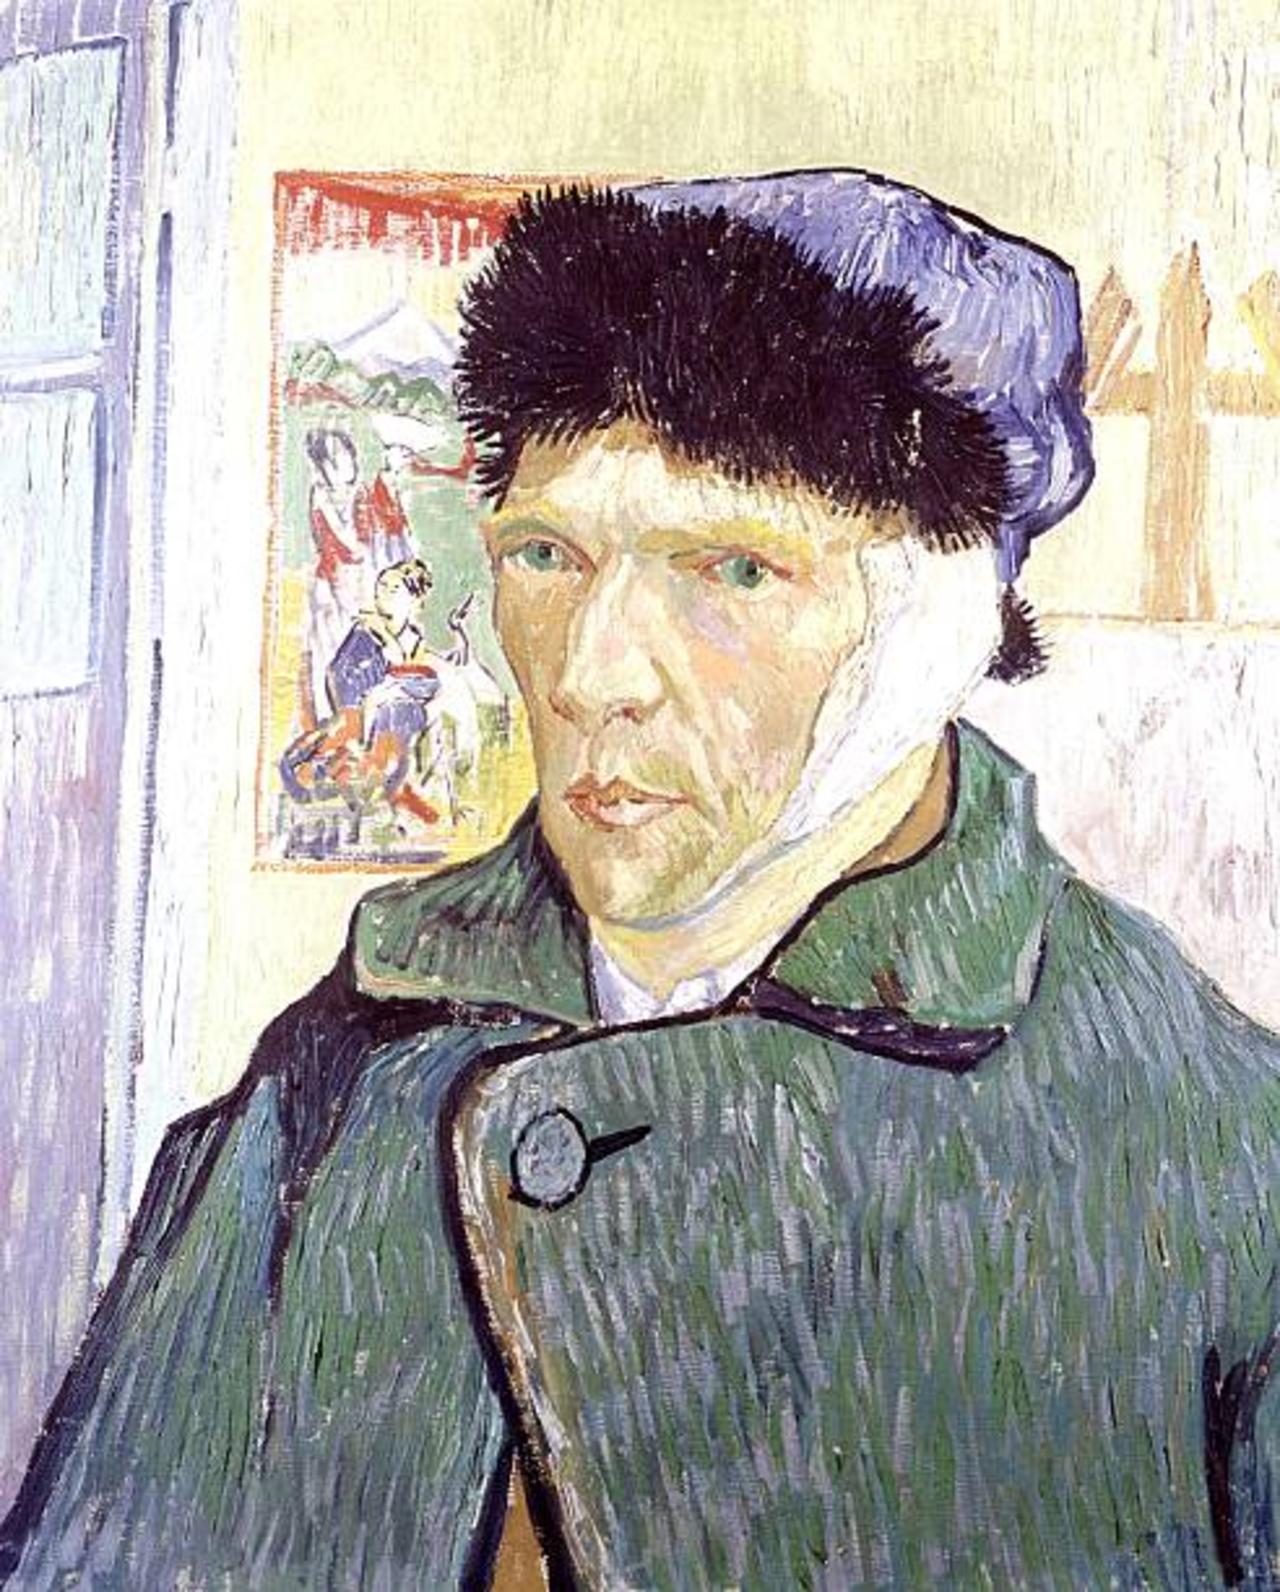 This Day in History: Van Gogh Cuts off His Ear (Saturday, December 23rd)